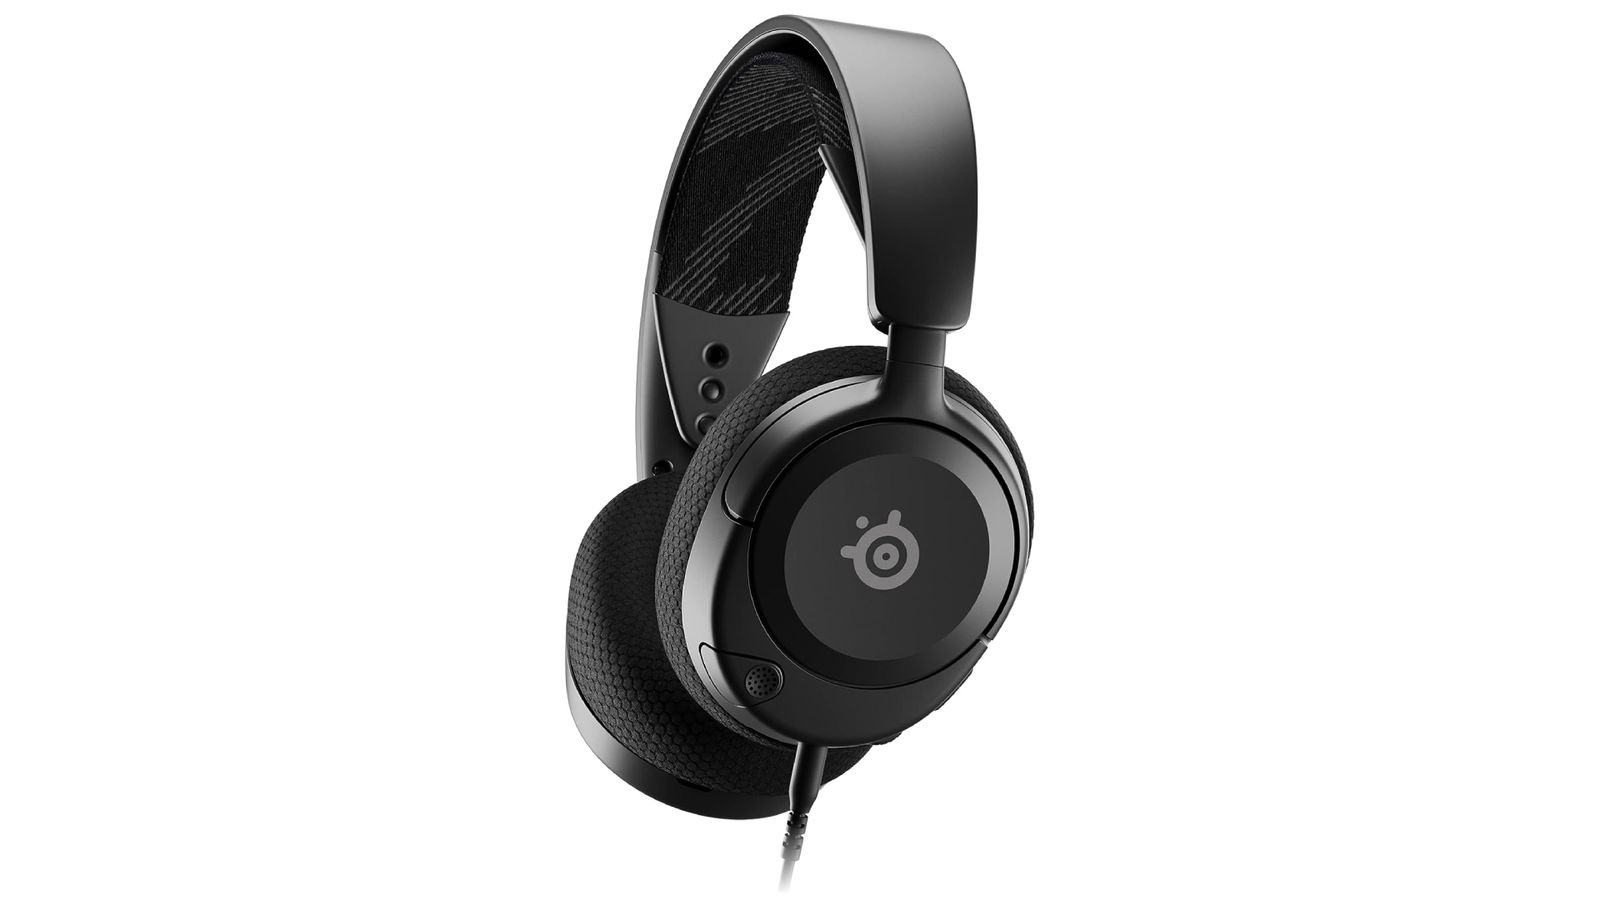 SteelSeries Arctis Nova 1 product image of a black, wired over-ear headset.